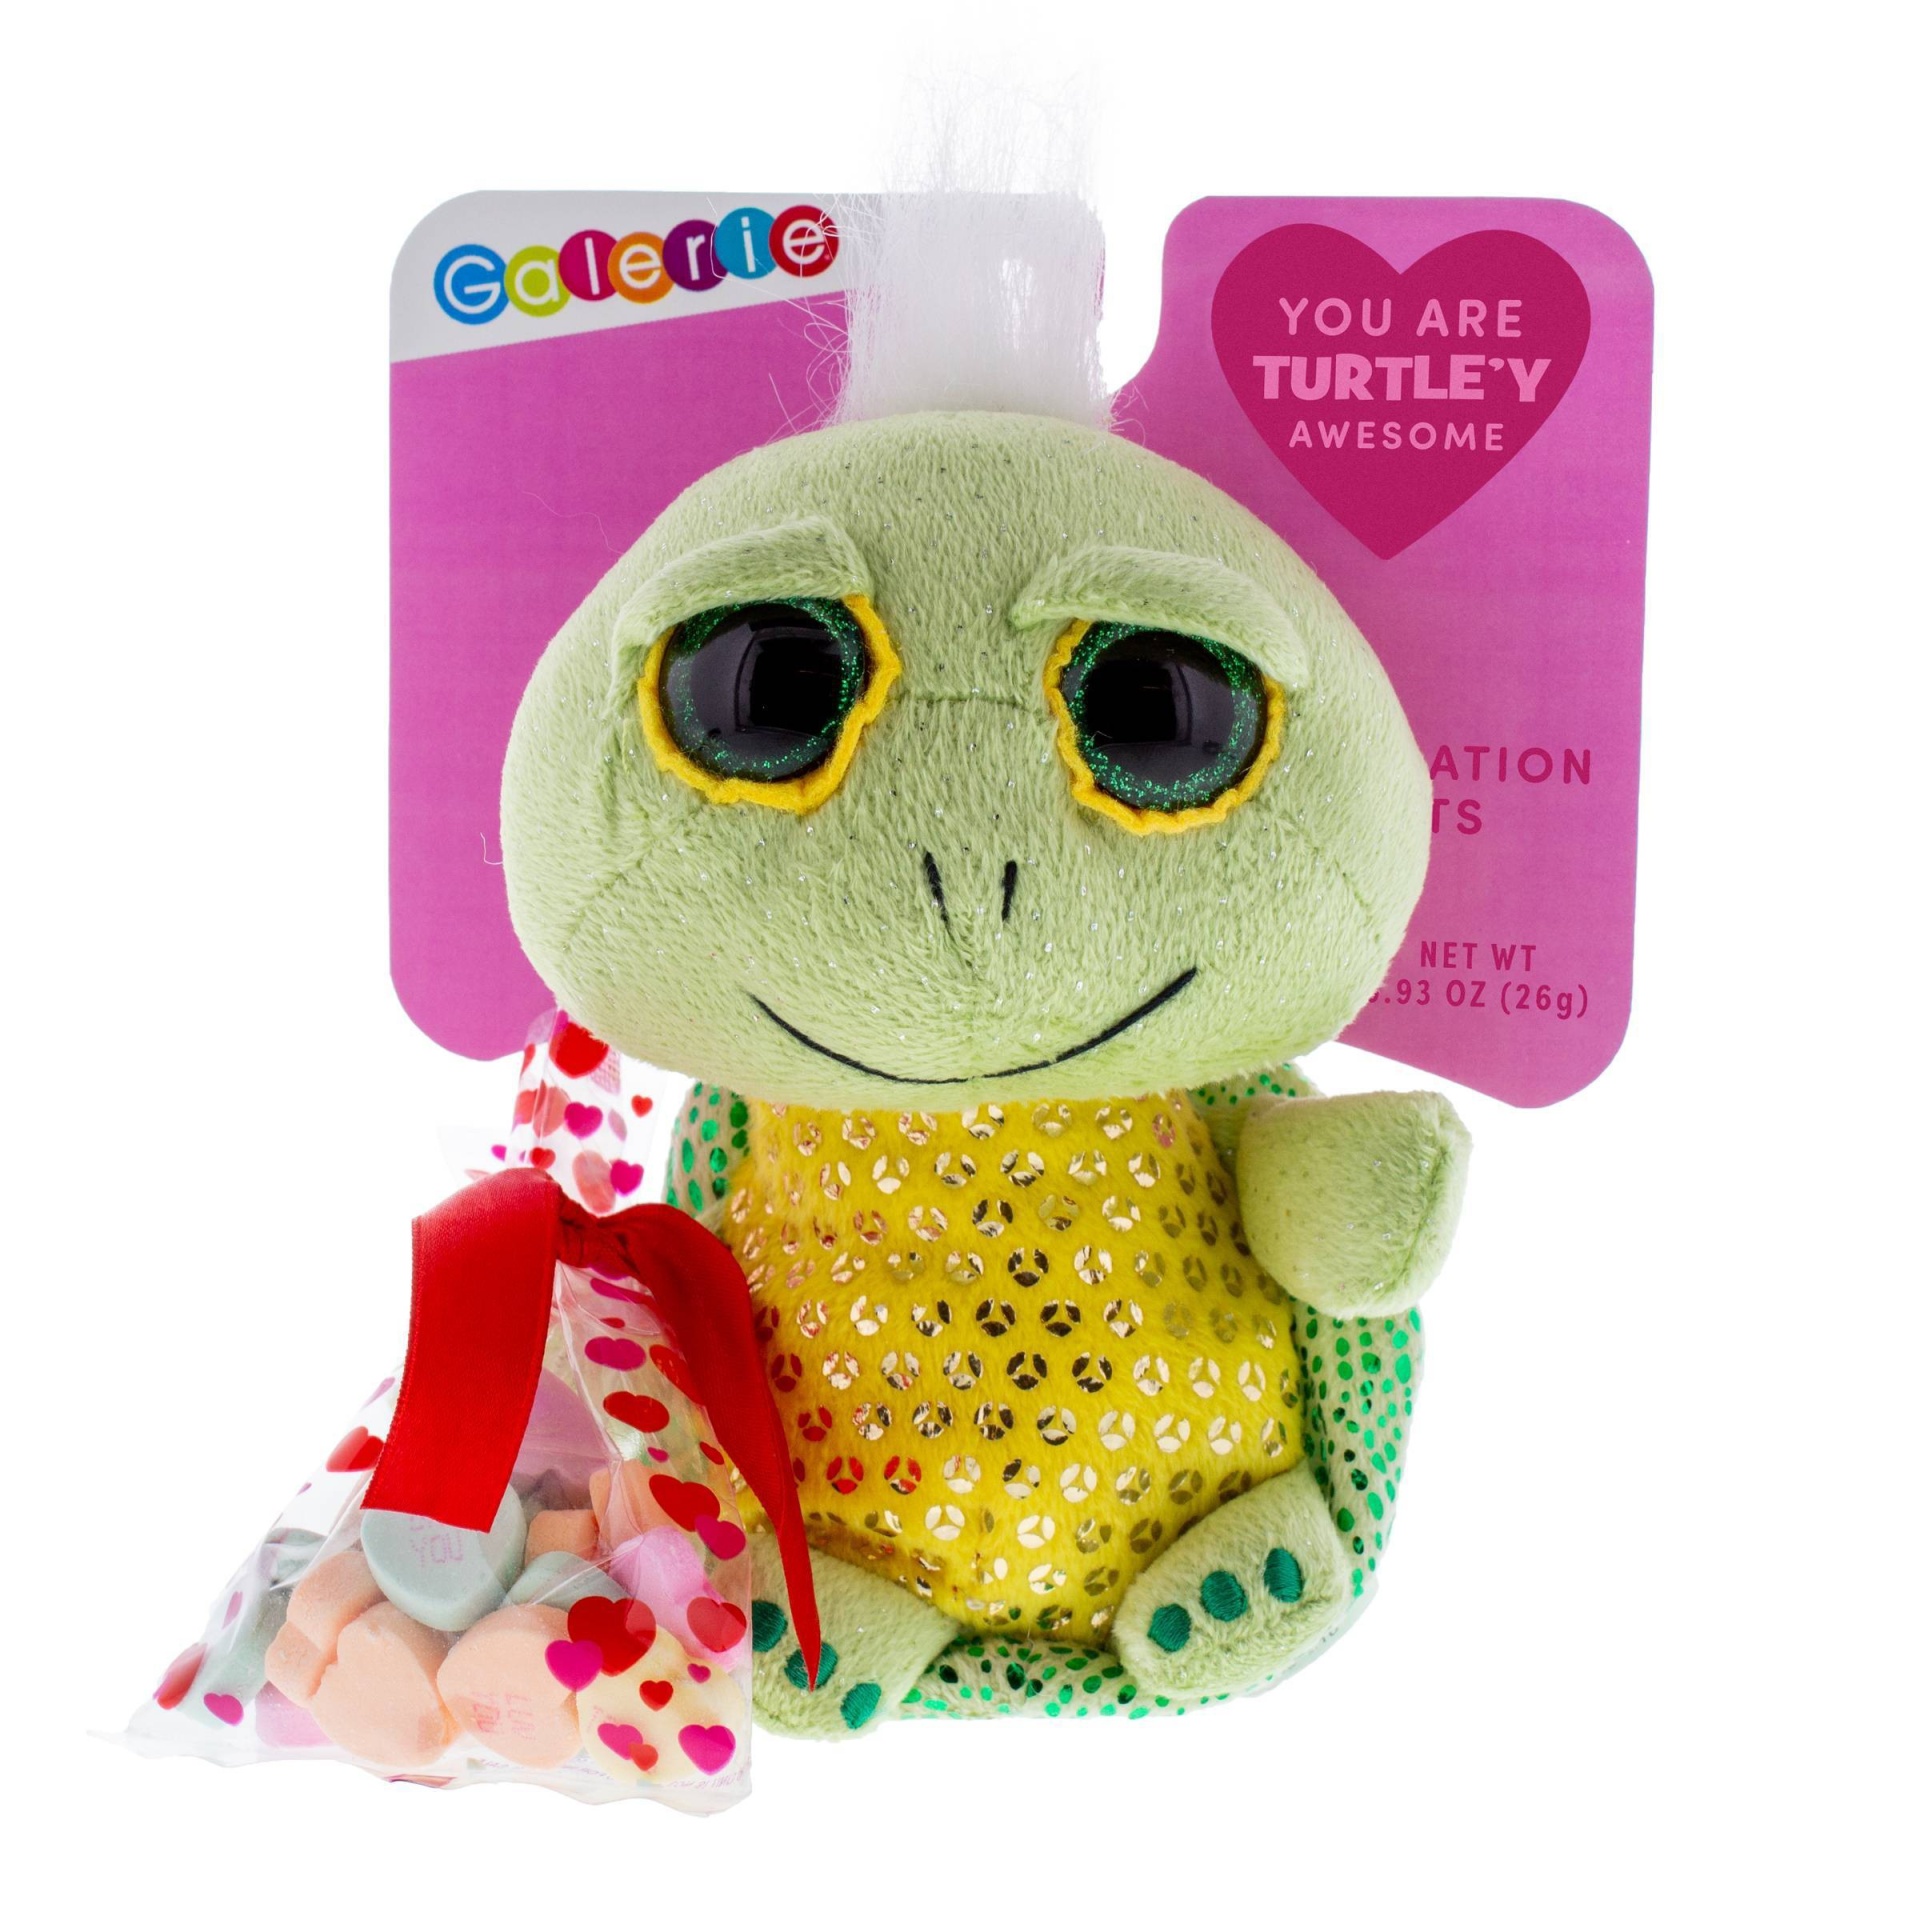 Galerie "You Are 'Turtle'y Awesome Brach's Conversation Hearts Plush Turtle 